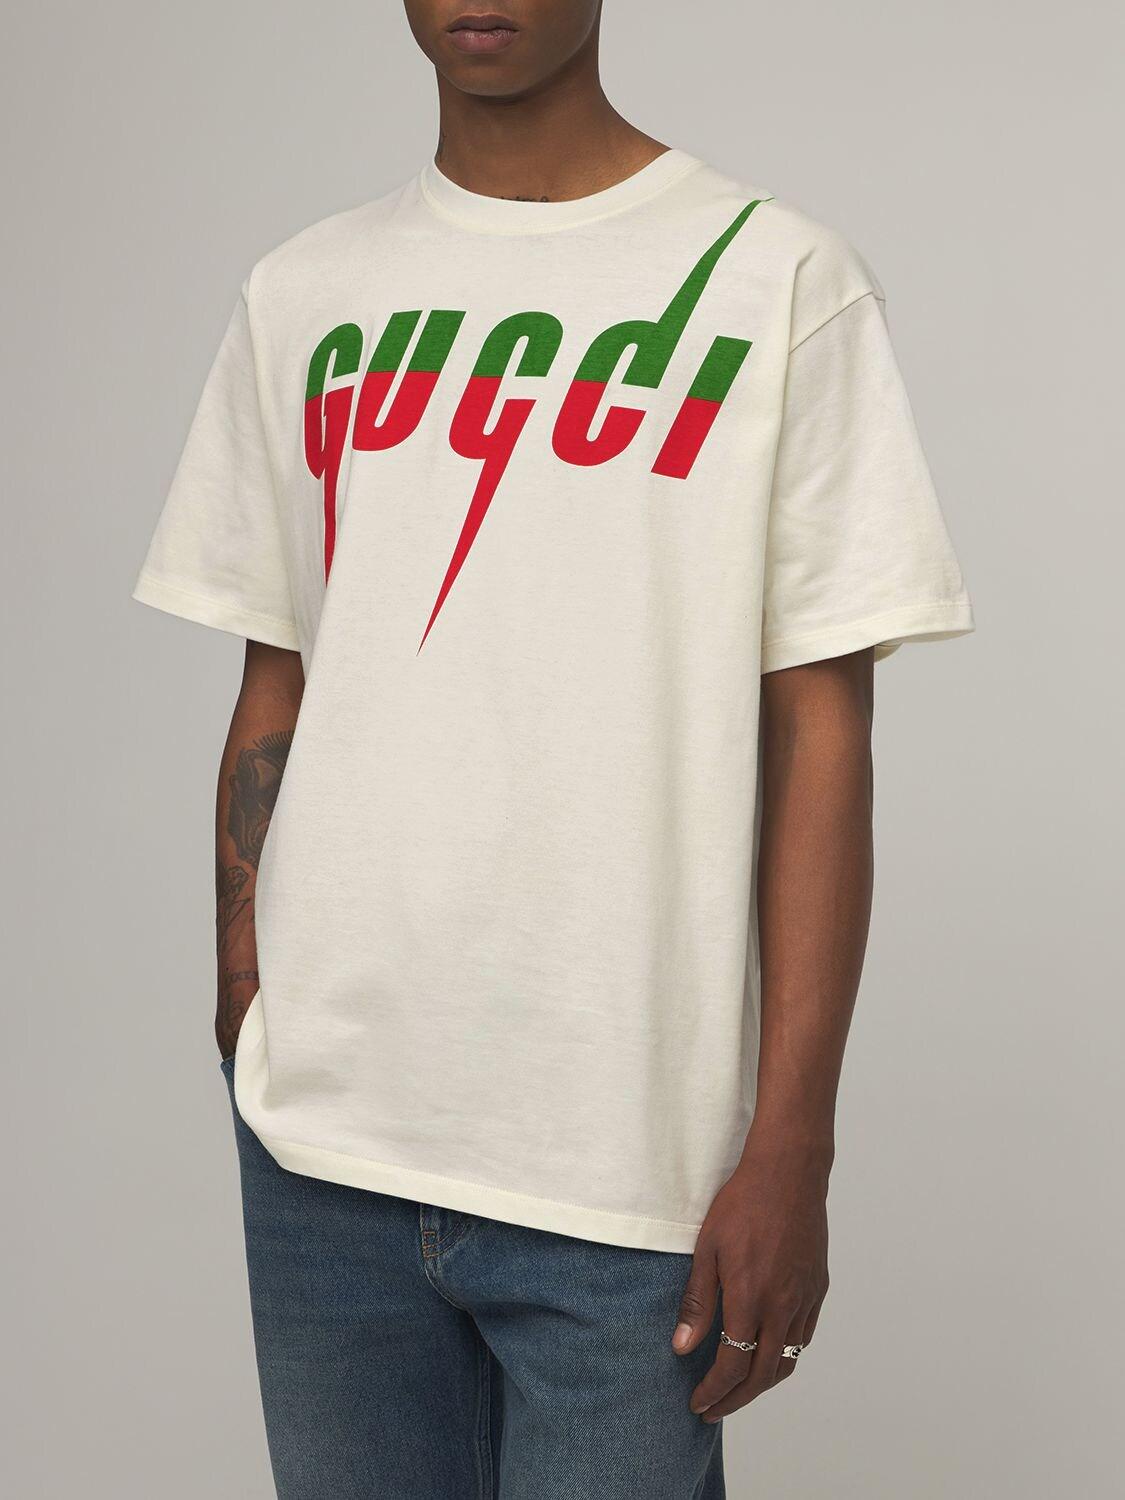 Gucci Cotton Blade T-shirt for Men - Save 46% | Lyst